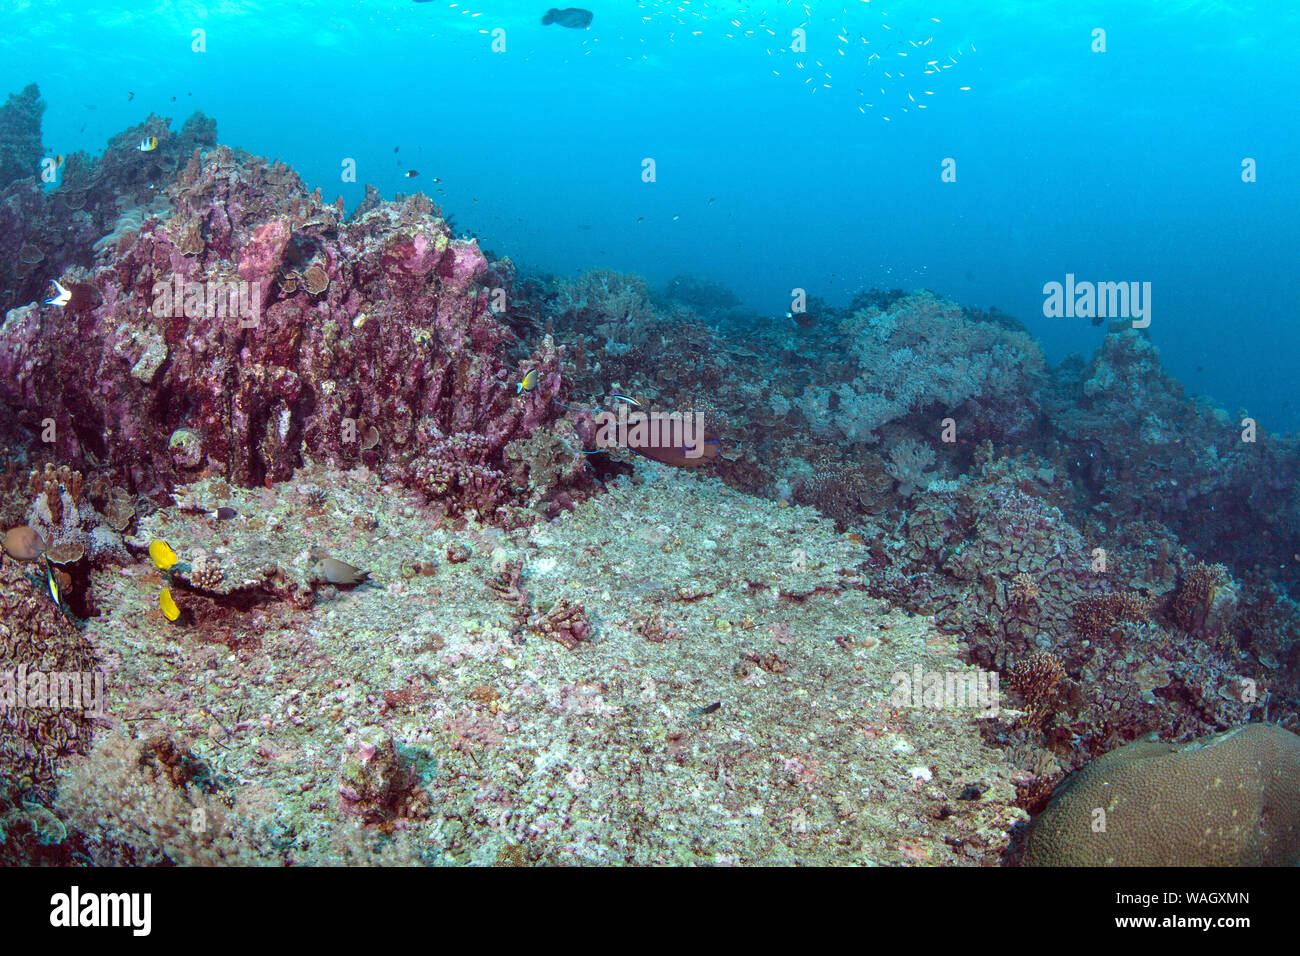 Dead and dying corals in the Spratly Islands in the South China Sea. Stock Photo